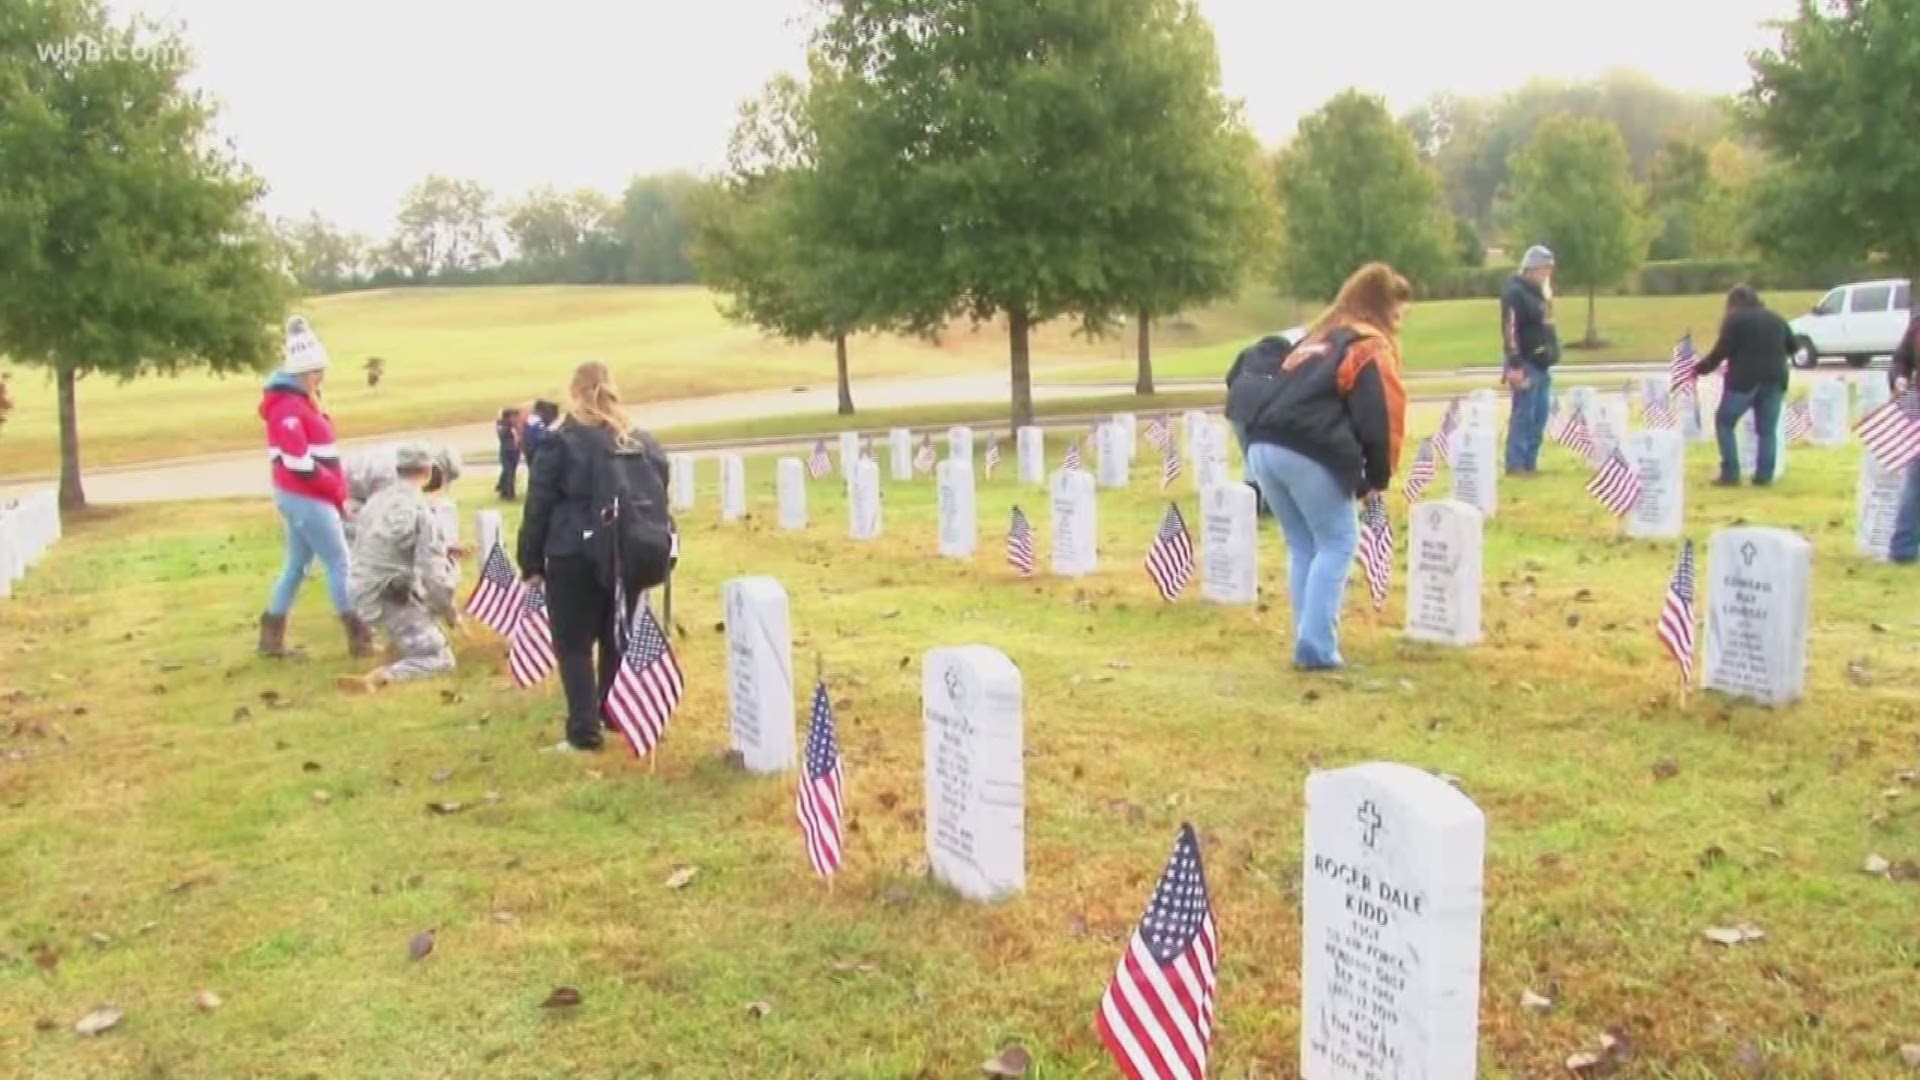 Today, volunteers started placing flags at veterans' gravesites at two East Tennessee cemeteries, ahead of veterans day.